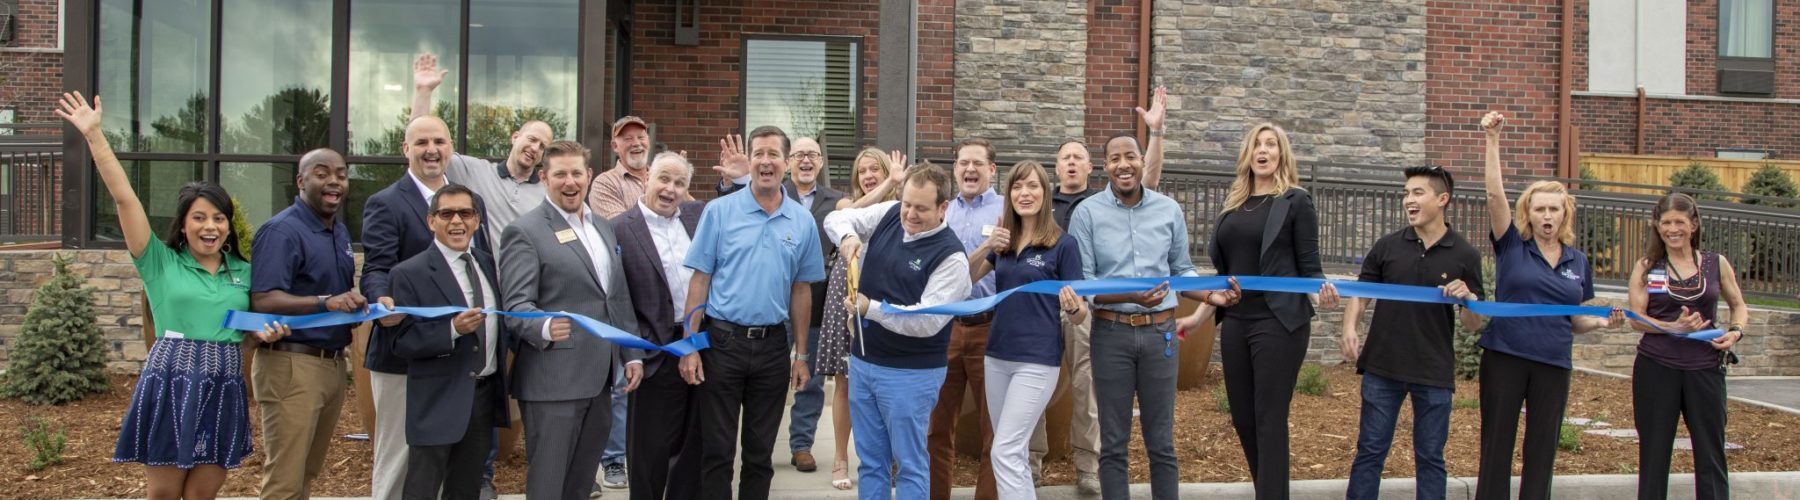 Ribbon Cutting At Uptown Suites